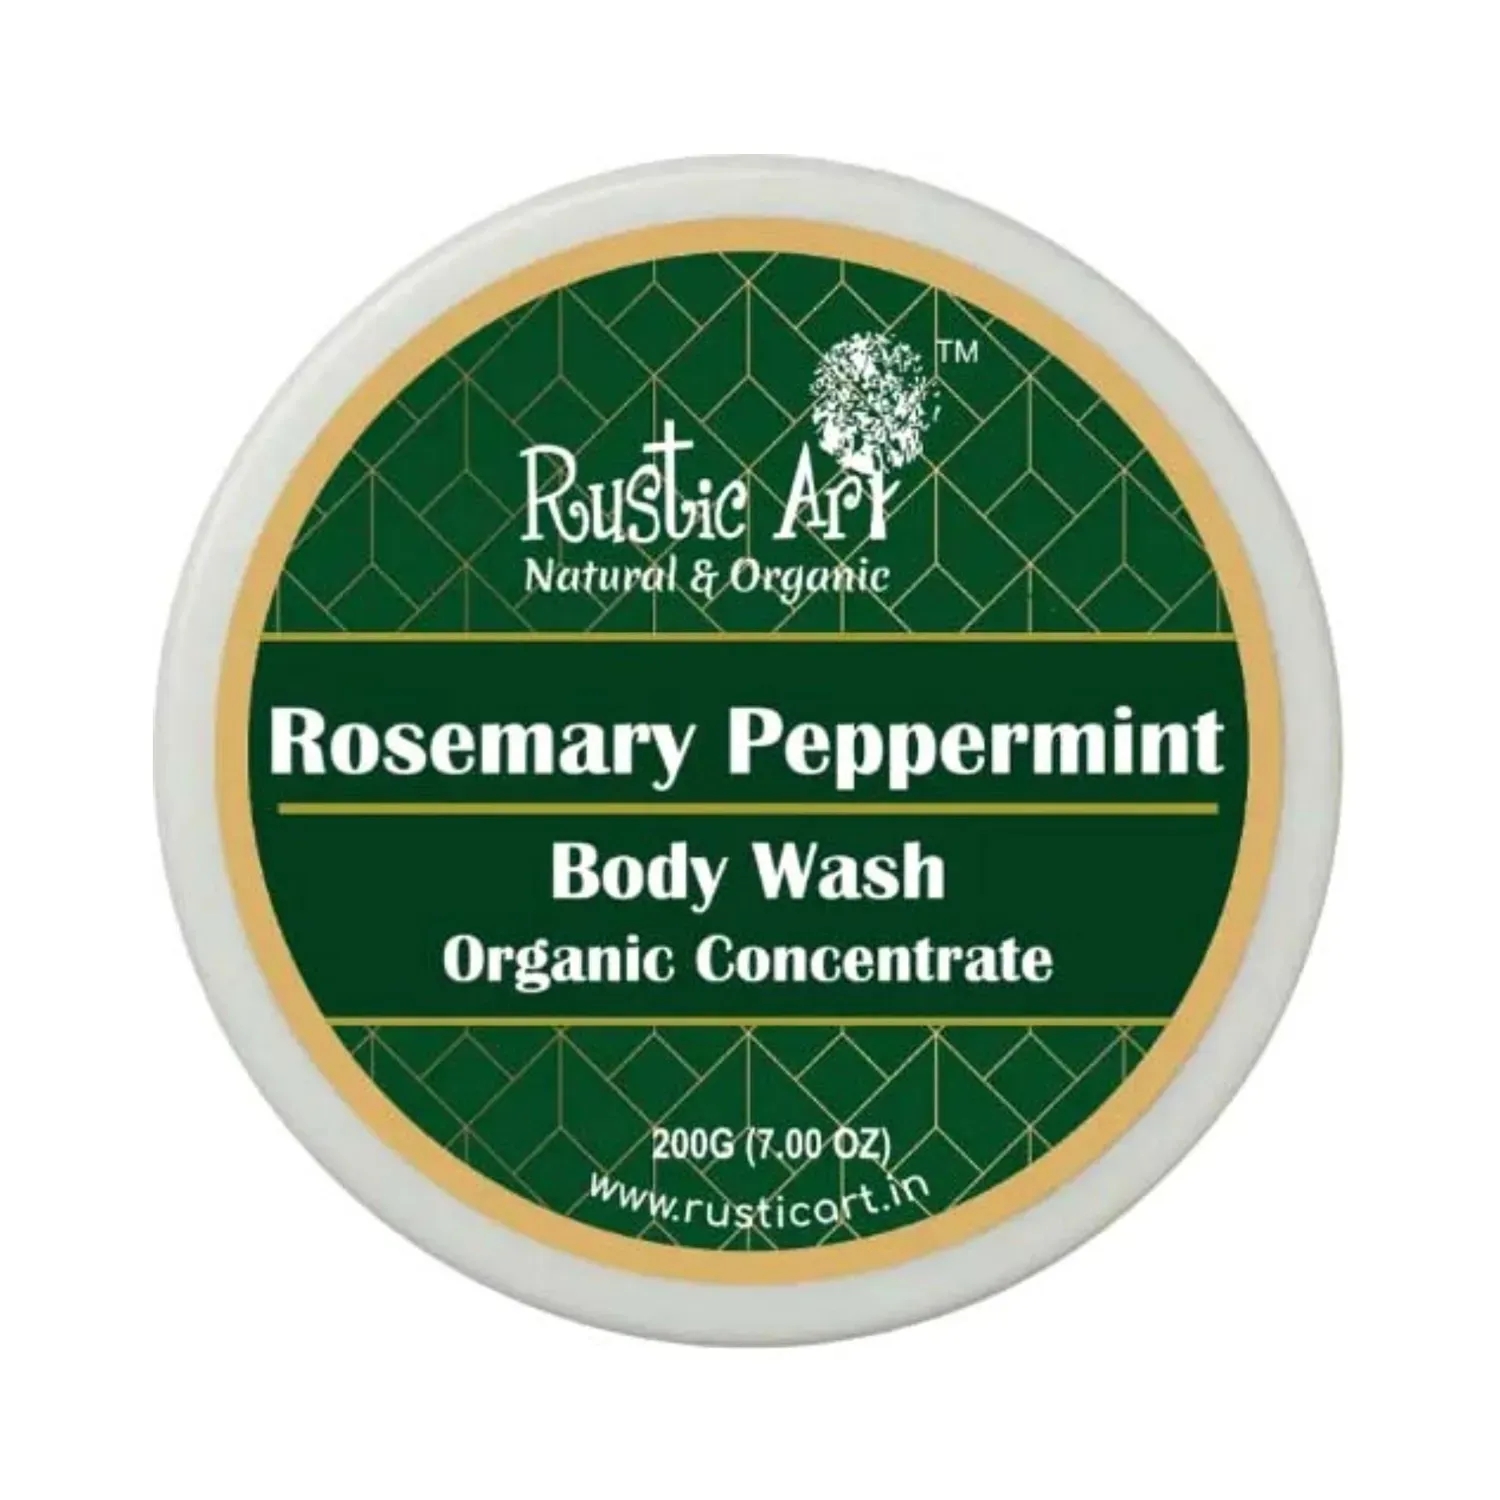 Rustic Art | Rustic Art Organic Concentrate Rosemary Peppermint Body Wash (200g)